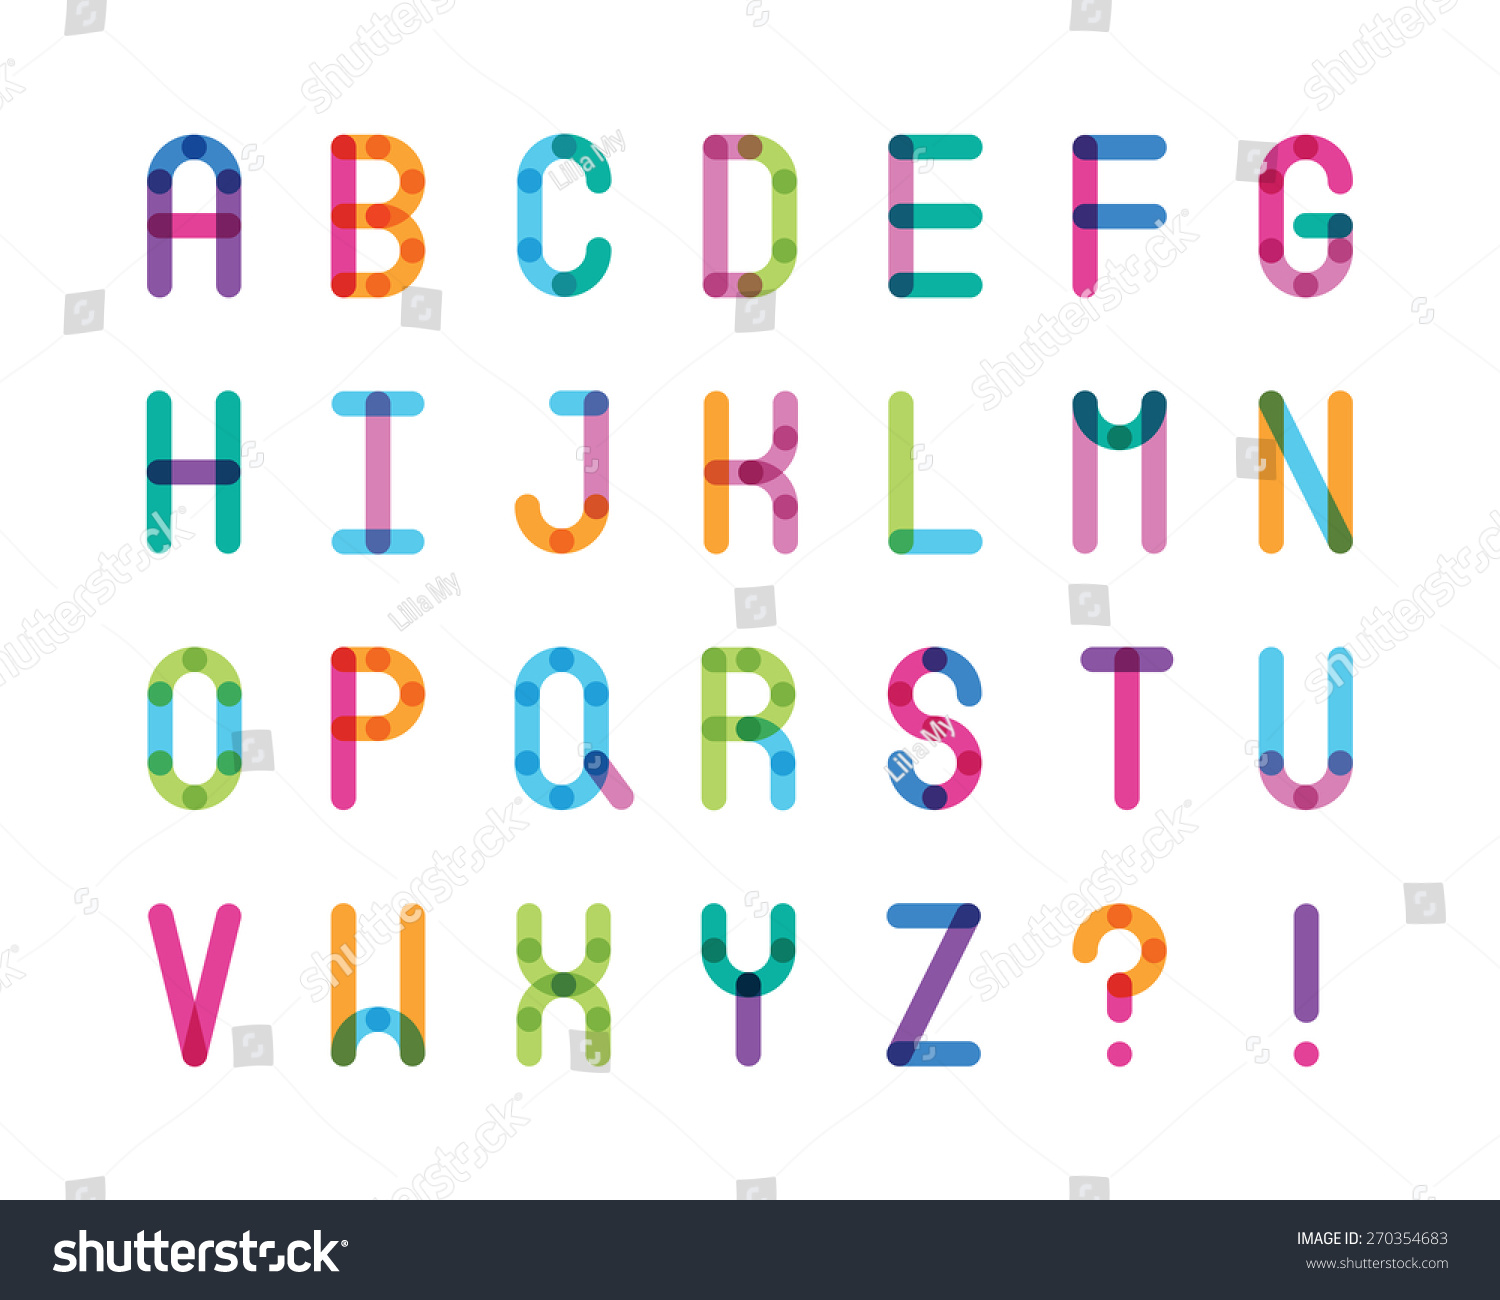 Abstract Color Alphabet Capital Letters Stock Vector 270354683 ...